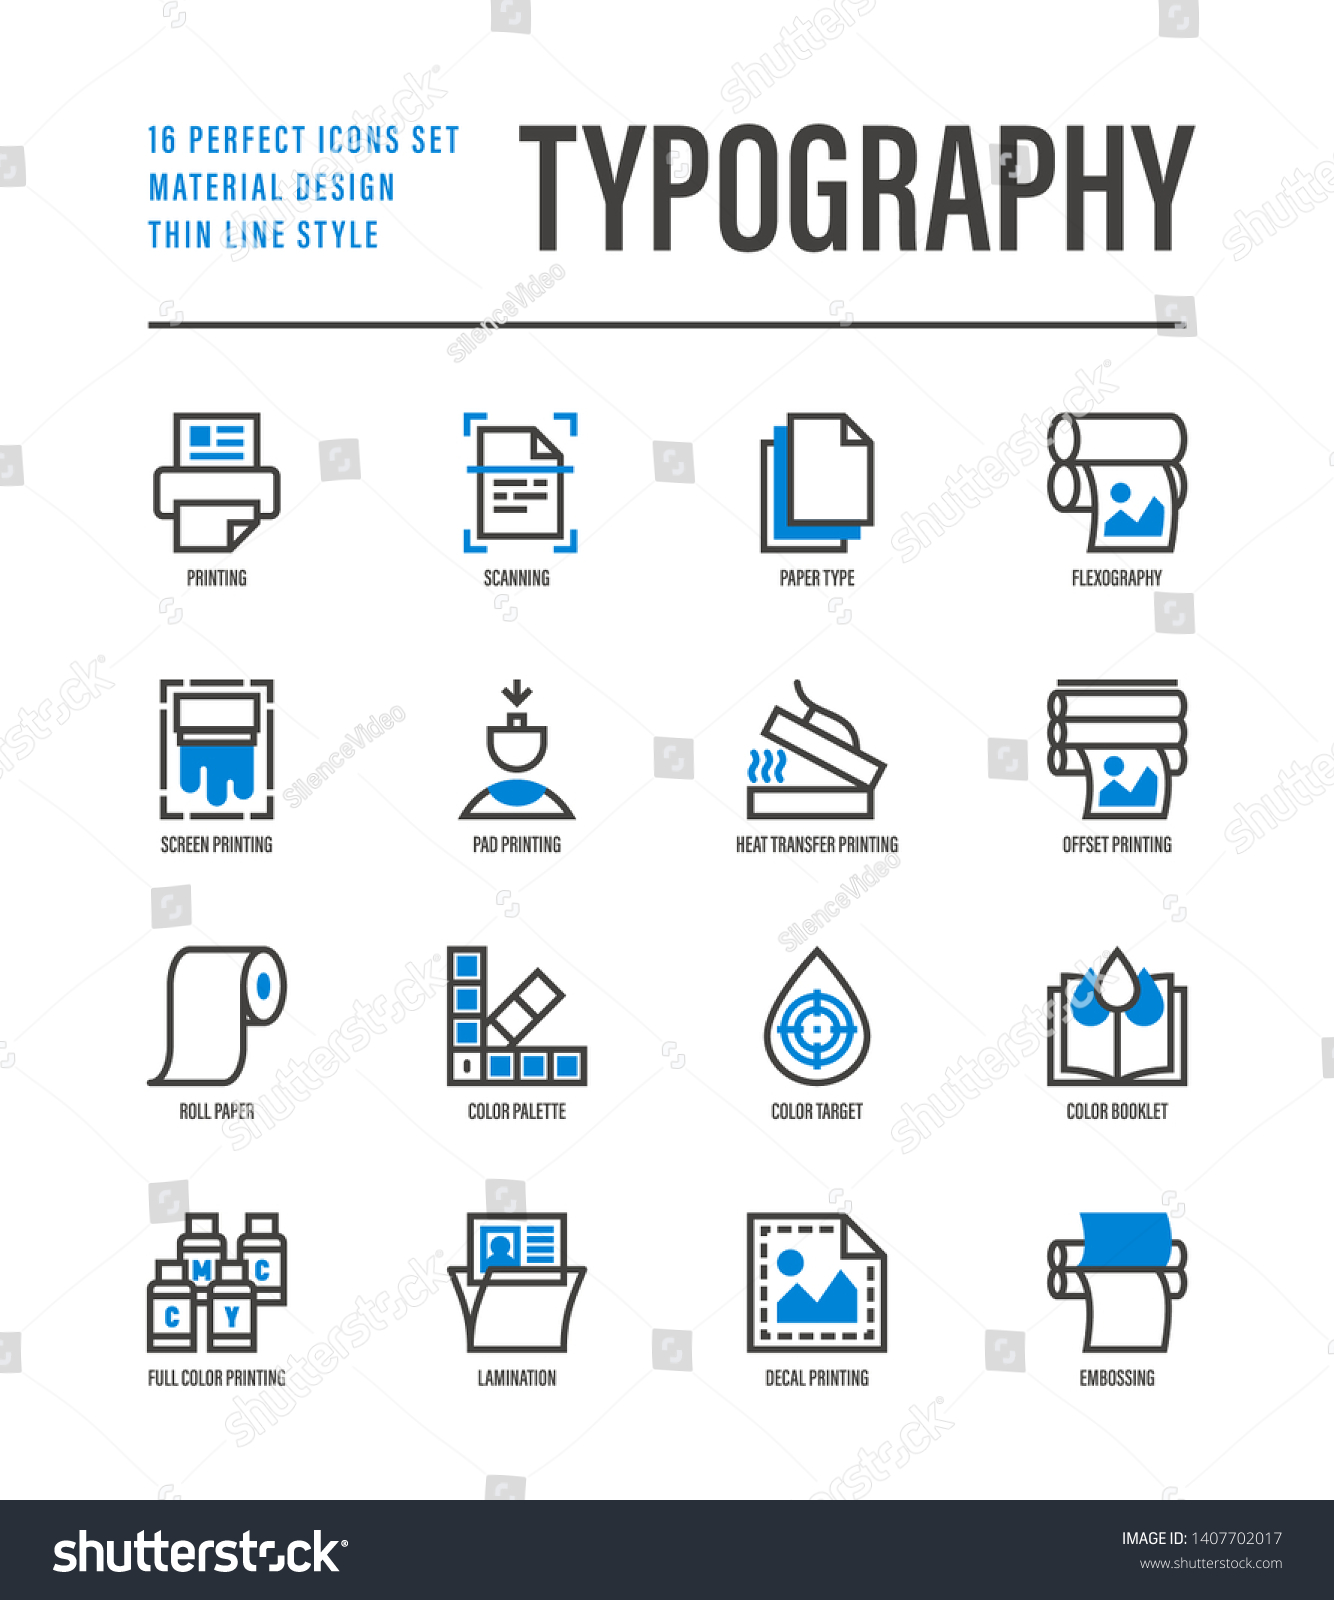 SVG of Typography, polygraphy thin line icons set. Printing, scanning, flexography, offset, roll paper, color palette, lamination, heat transfer printing, embossing. Vector illustration. svg